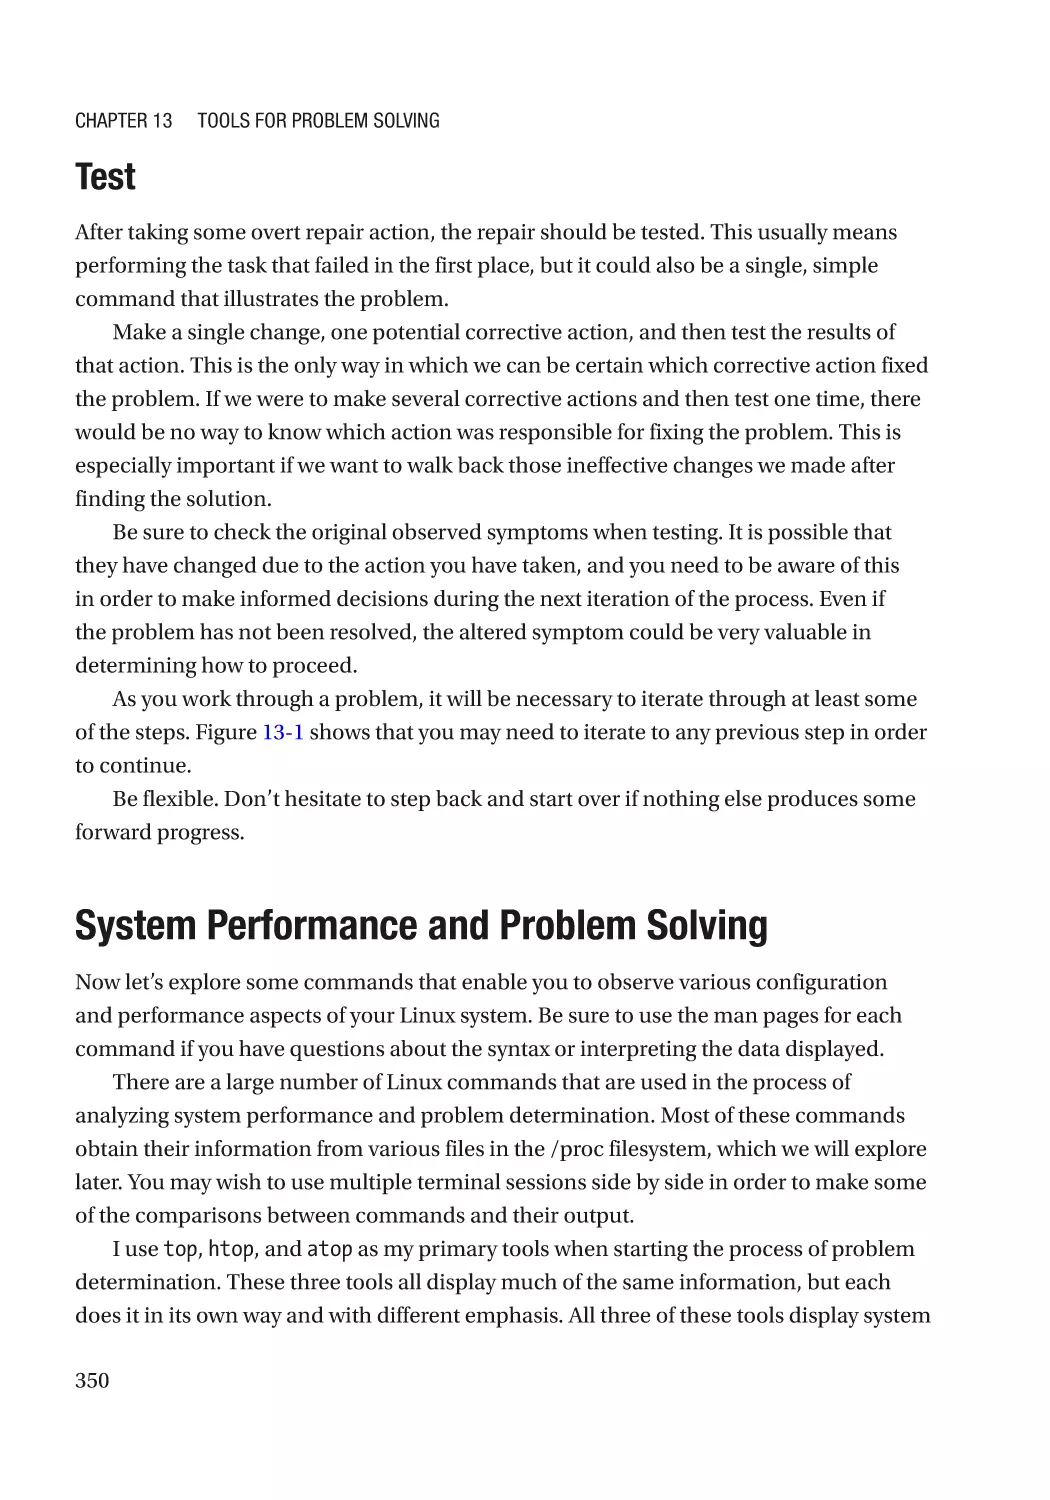 Test
System Performance and Problem Solving